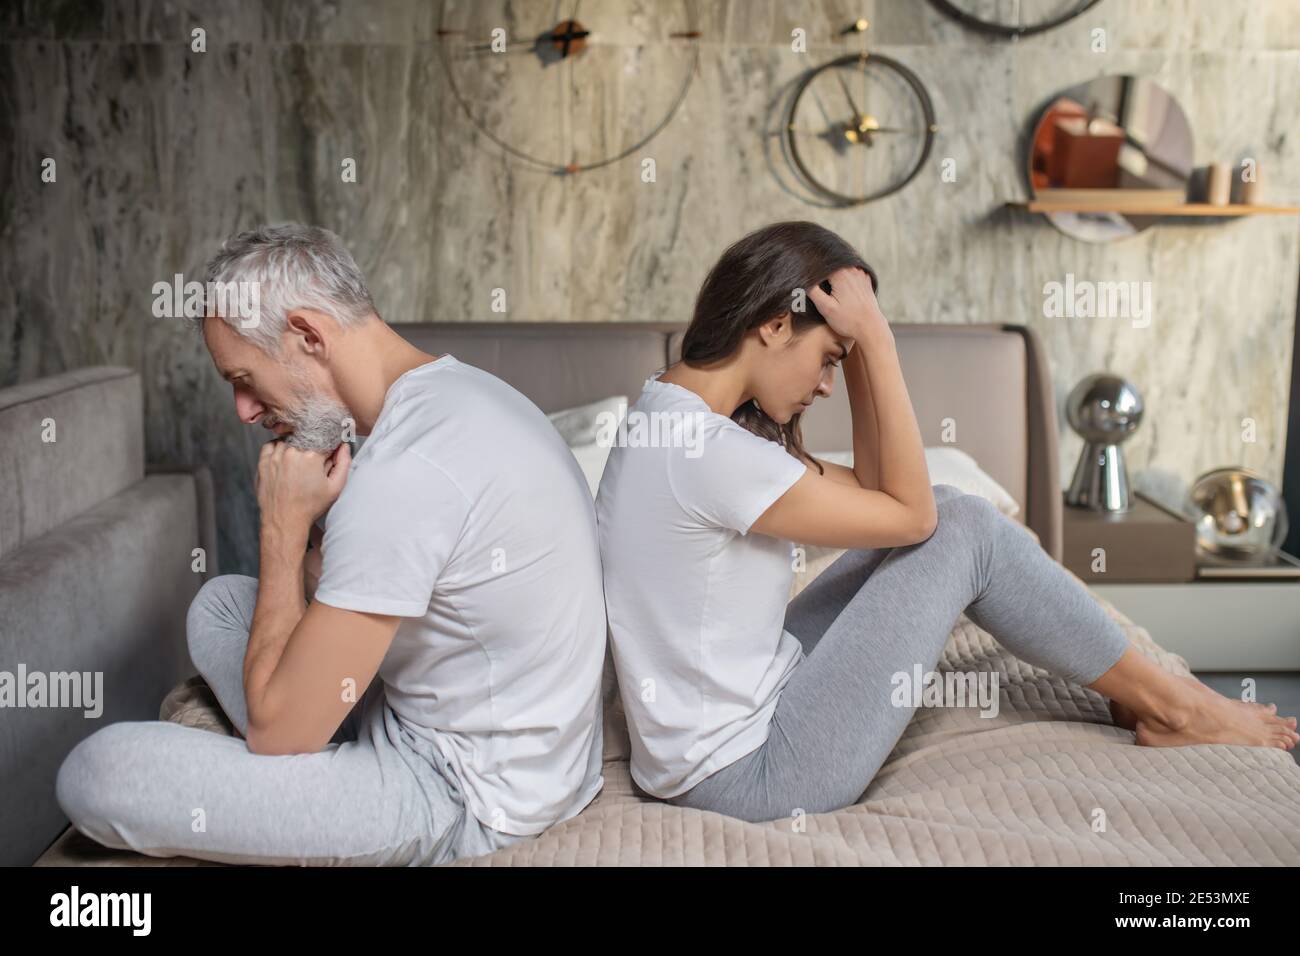 Turned away man and woman sitting on bed Stock Photo